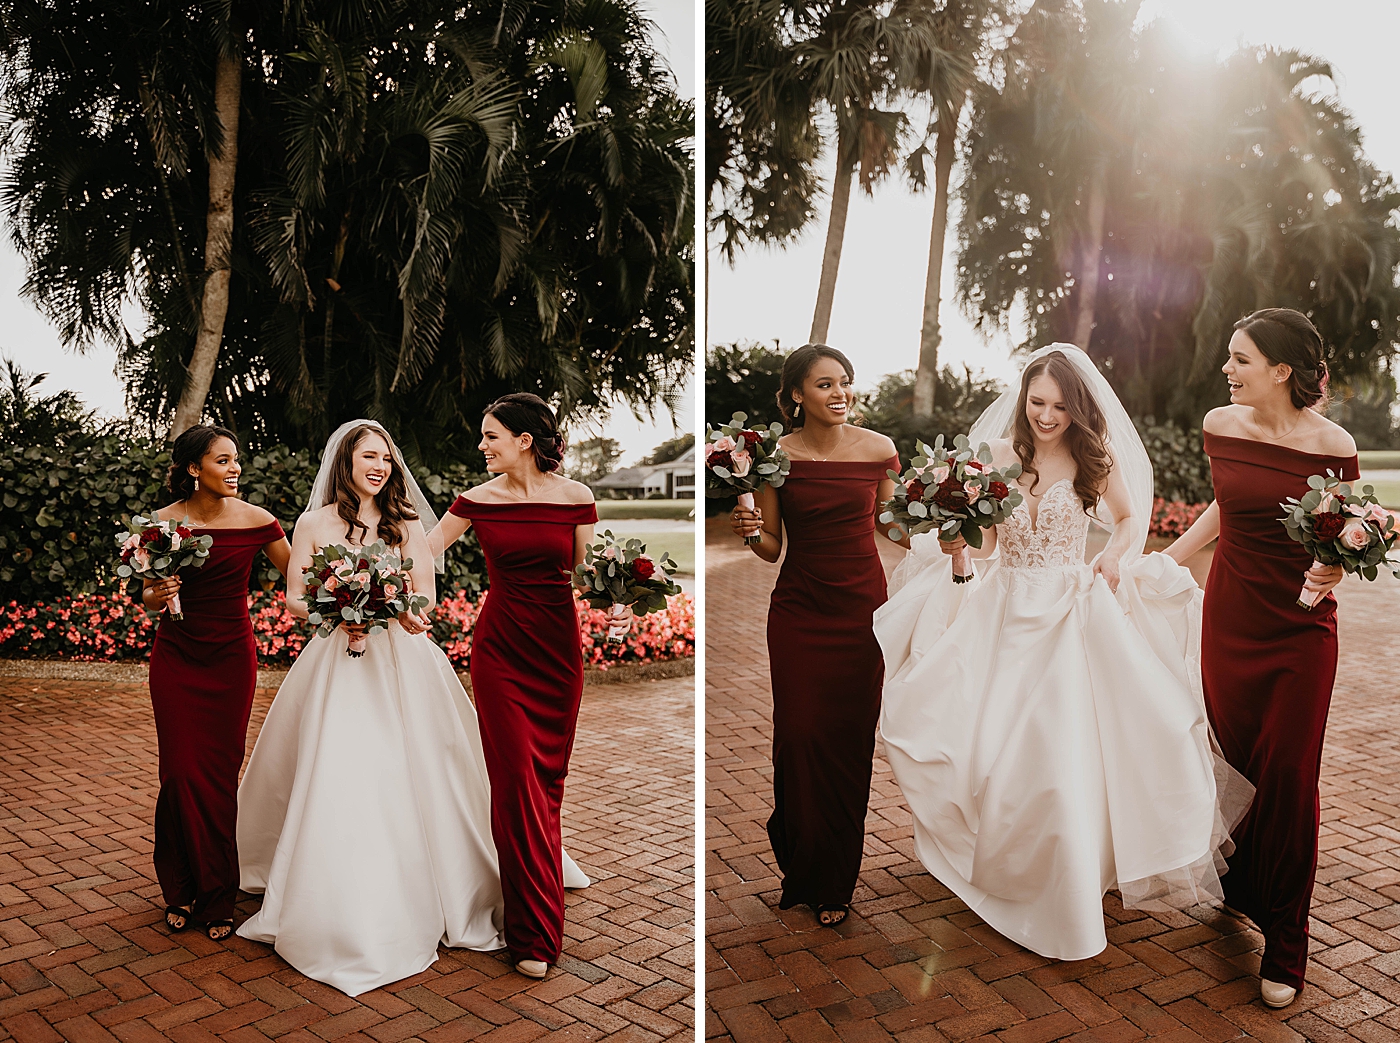 Bride and Bridesmaids walking together Breakers West Wedding Photography captured by South Florida Wedding Photographer Krystal Capone Photography 